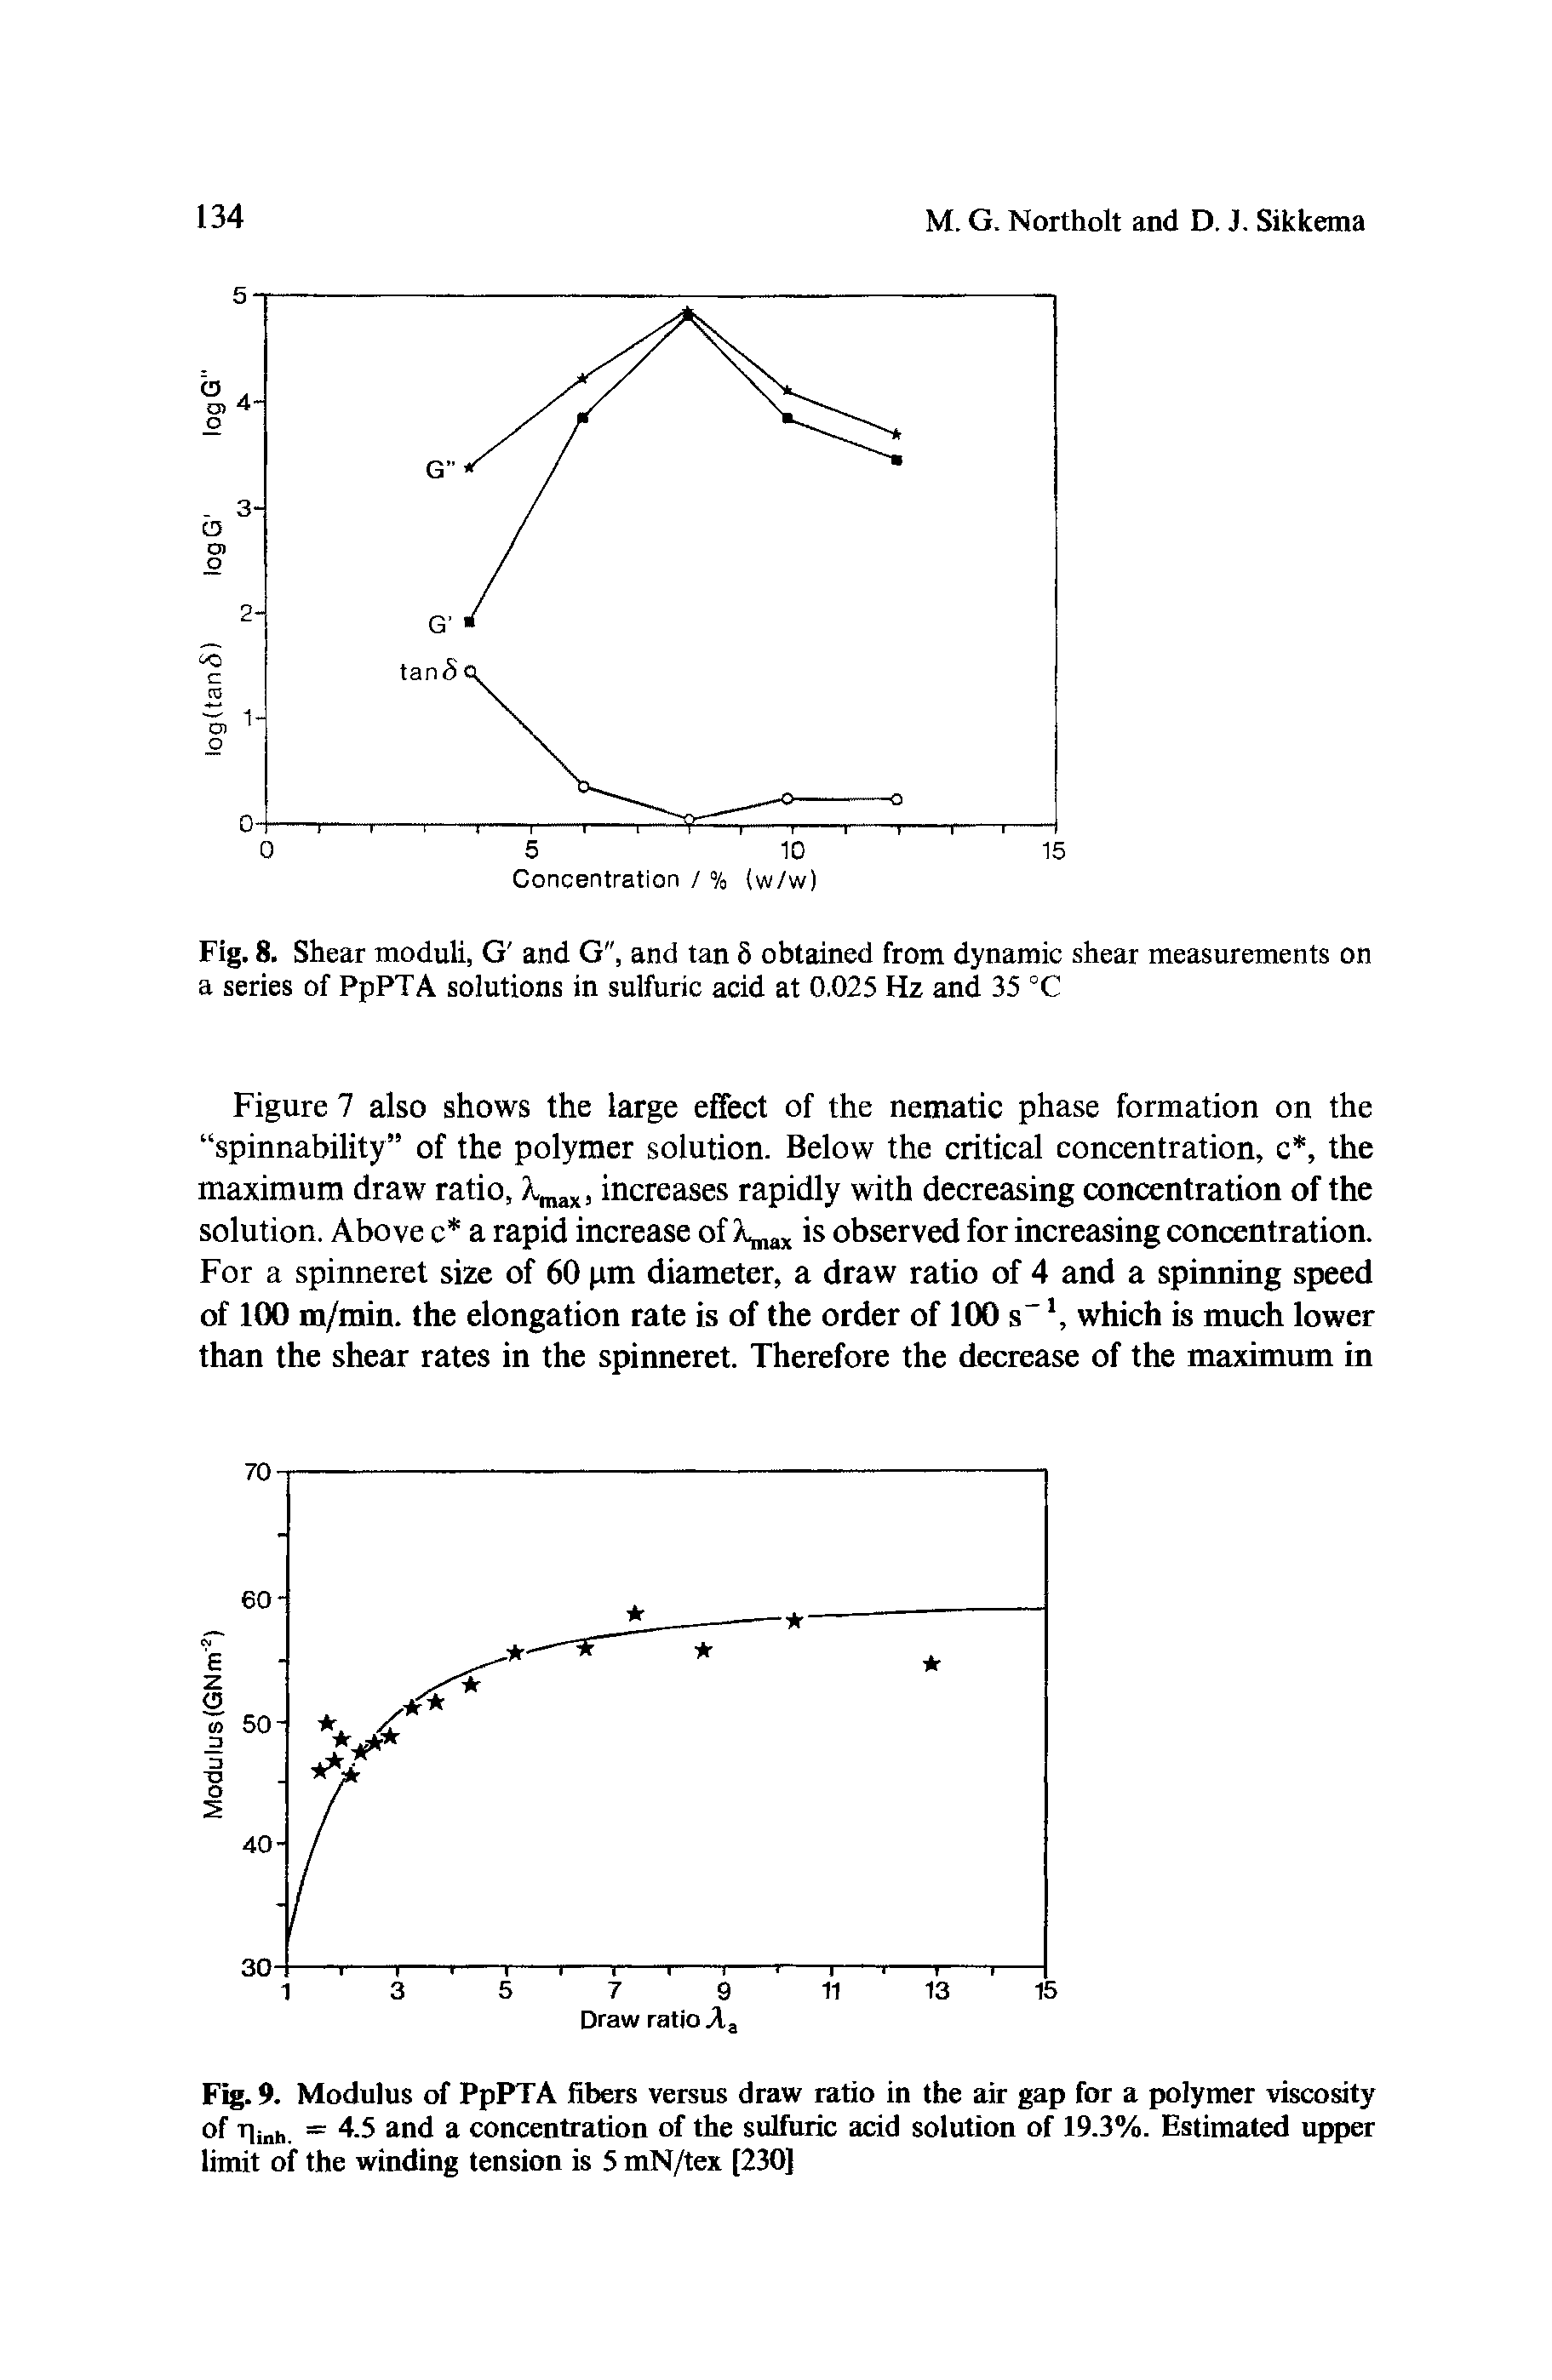 Fig. 9. Modulus of PpPTA fibers versus draw ratio in the air gap for a polymer viscosity of fiinh. = 4.5 and a concentration of the sulfuric acid solution of 19.3%. Estimated upper limit of the winding tension is 5 mN/tex [230]...